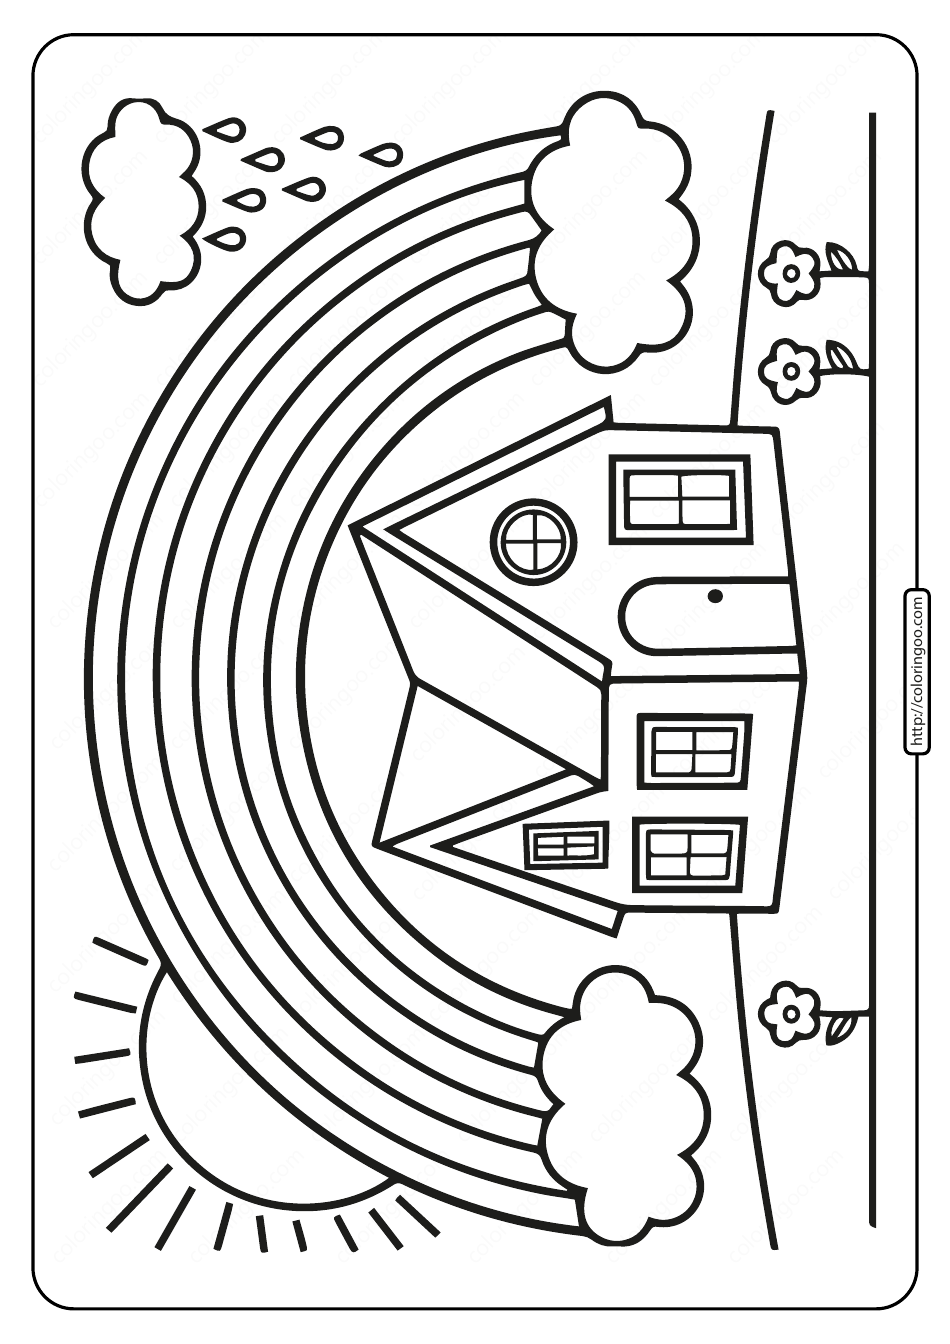 Rainbow Above House Coloring Page, Page 1